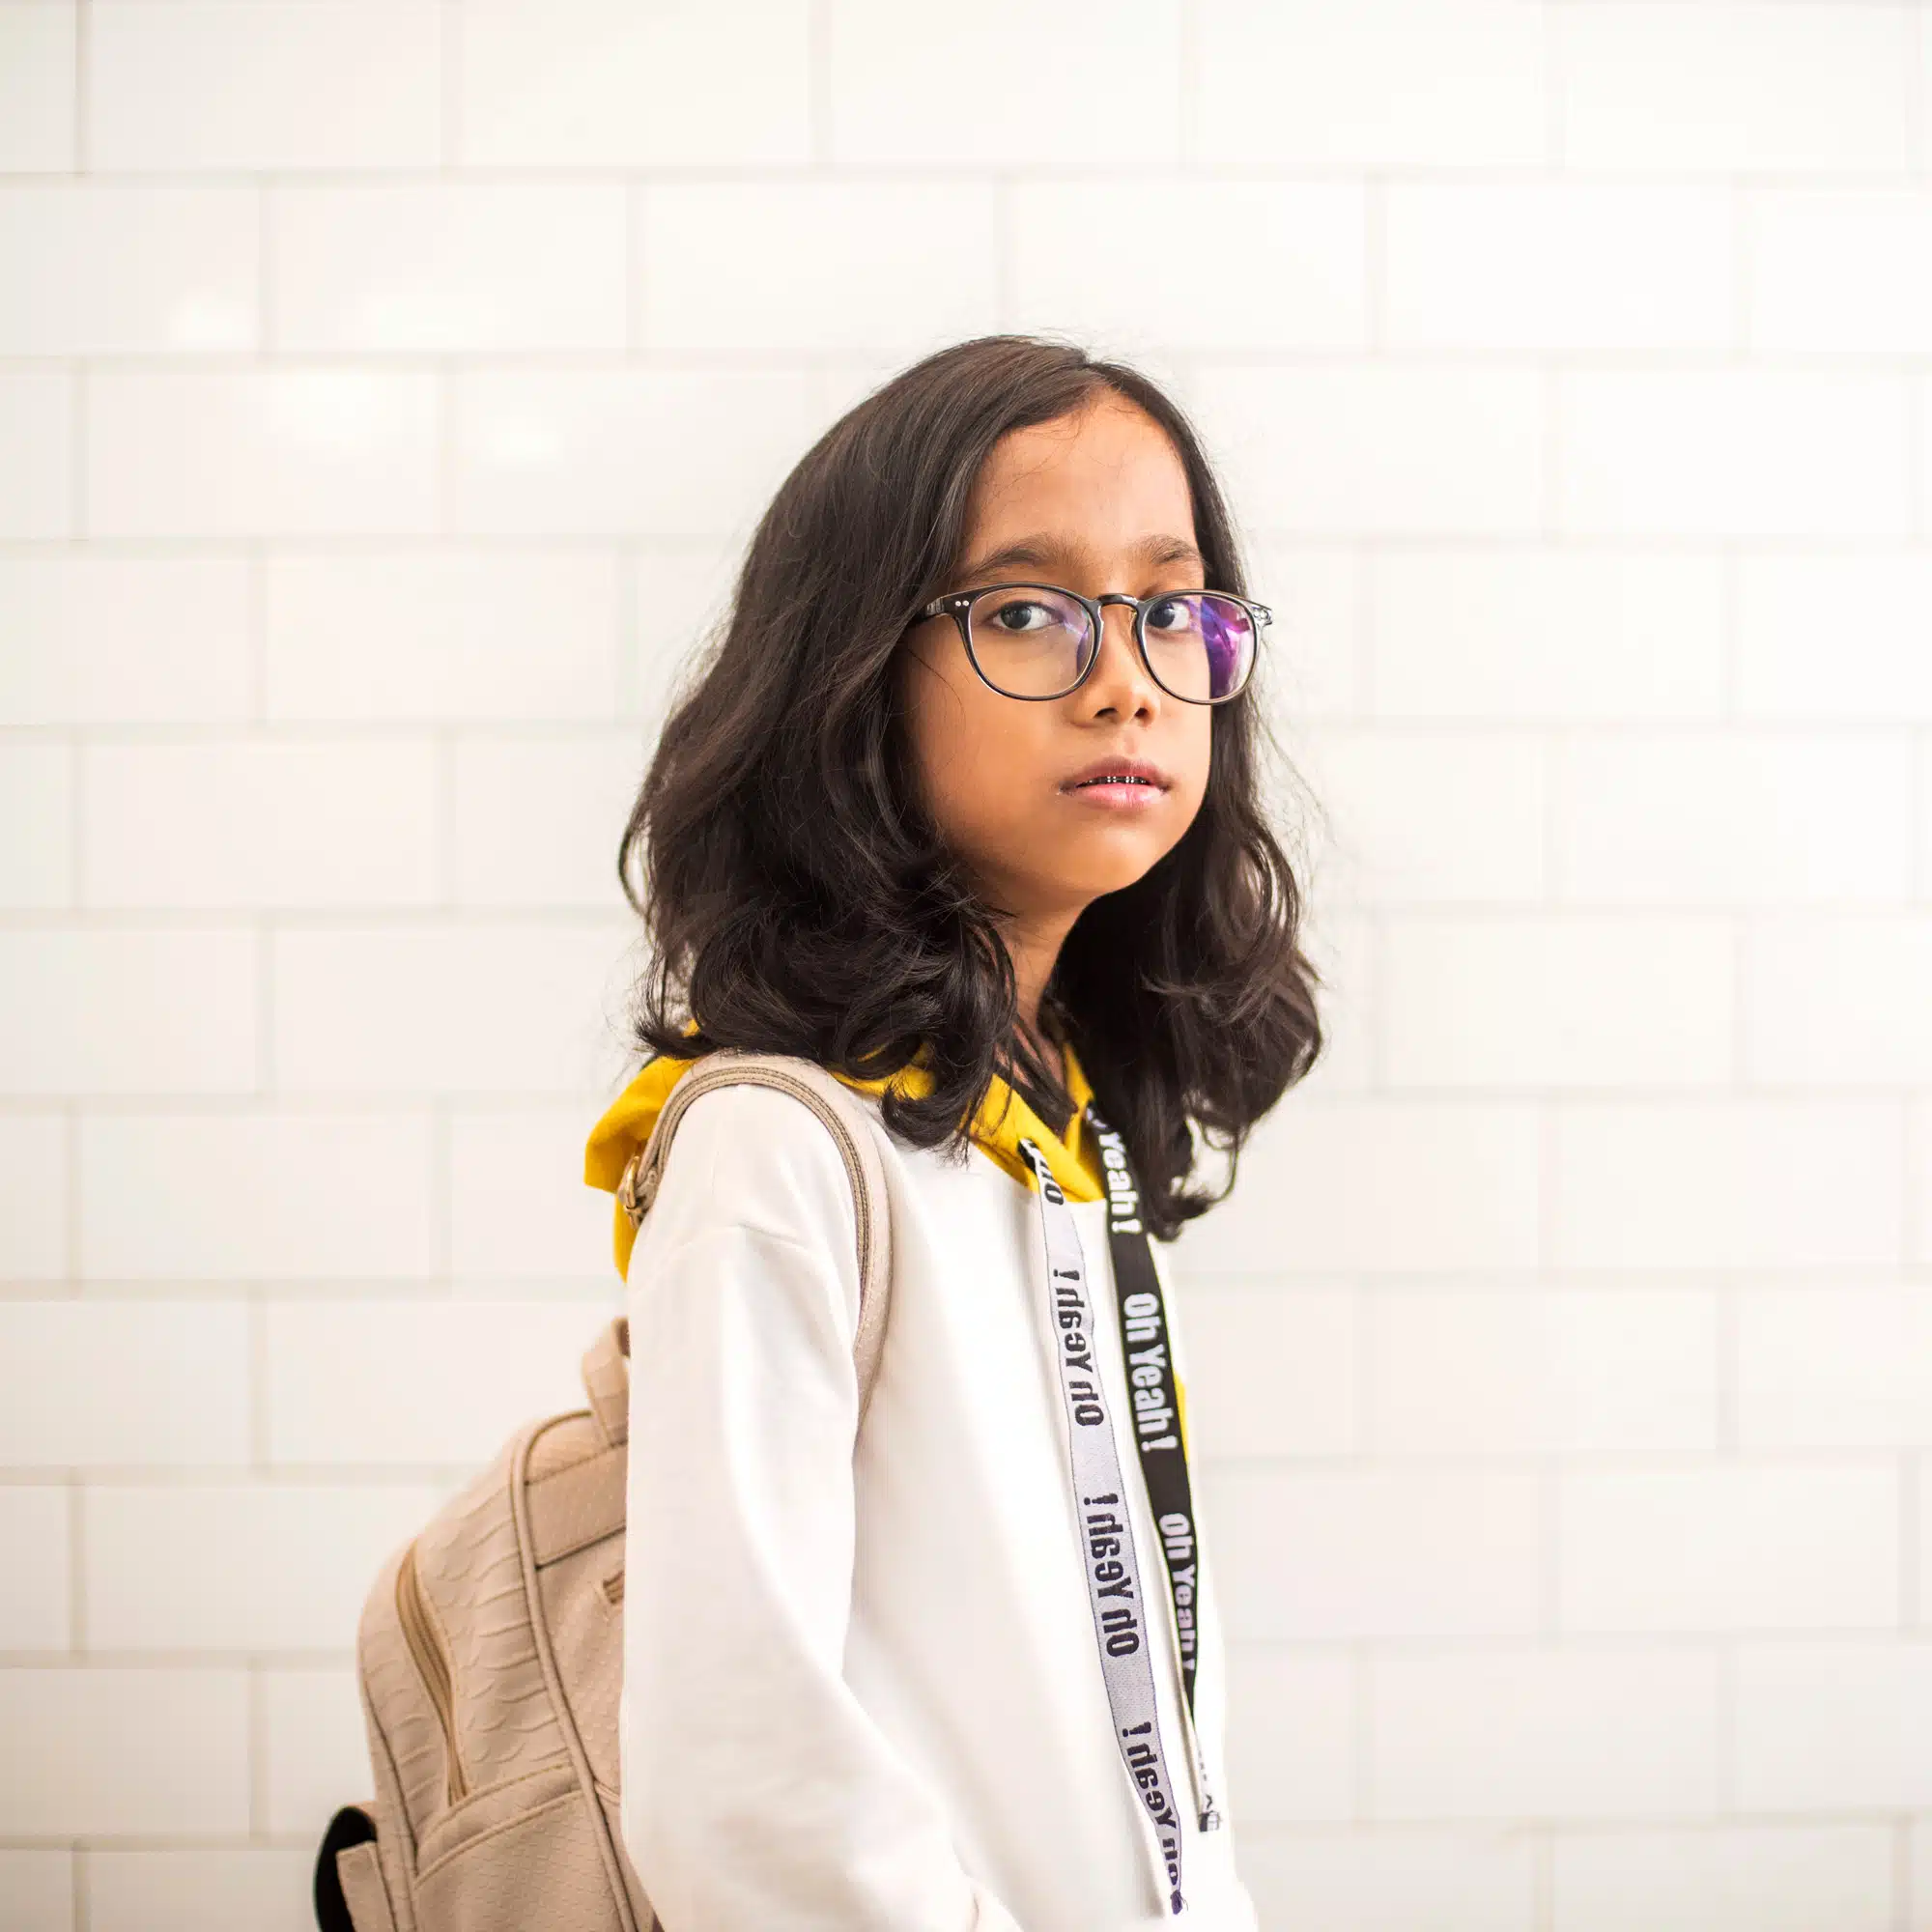 12 year old girl with glasses and backpack on standing in front of white brick wall